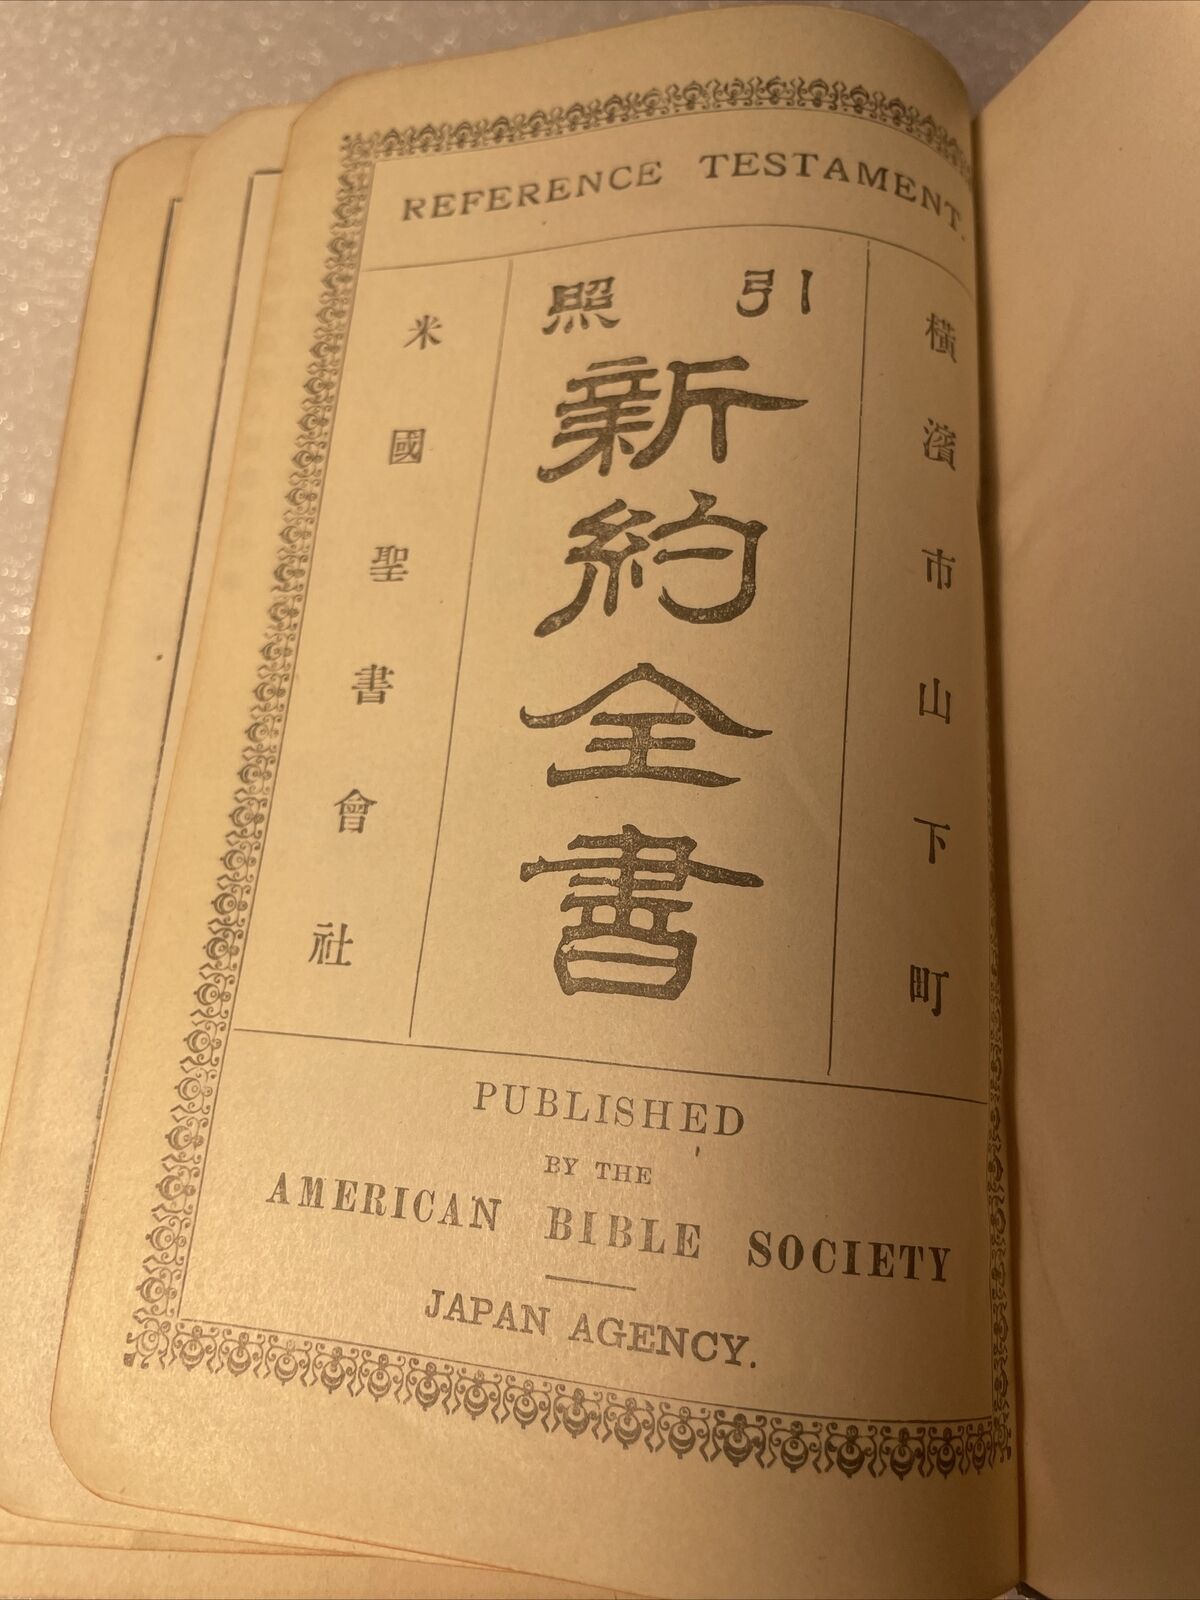 Antique 1904 Japanese Bible - American Bible Society